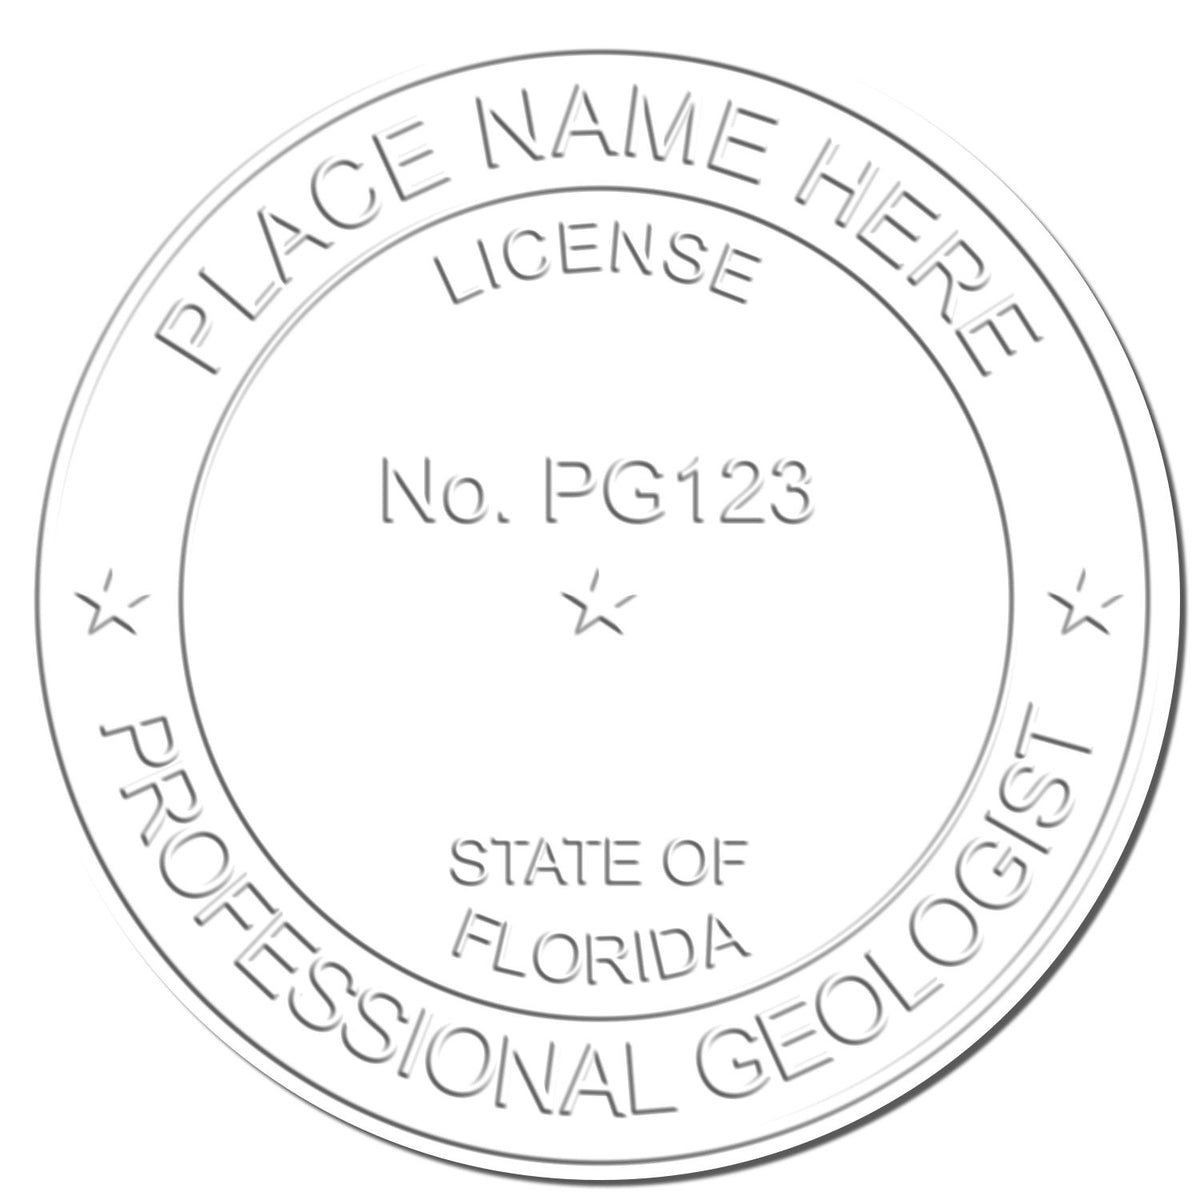 This paper is stamped with a sample imprint of the Handheld Florida Professional Geologist Embosser, signifying its quality and reliability.